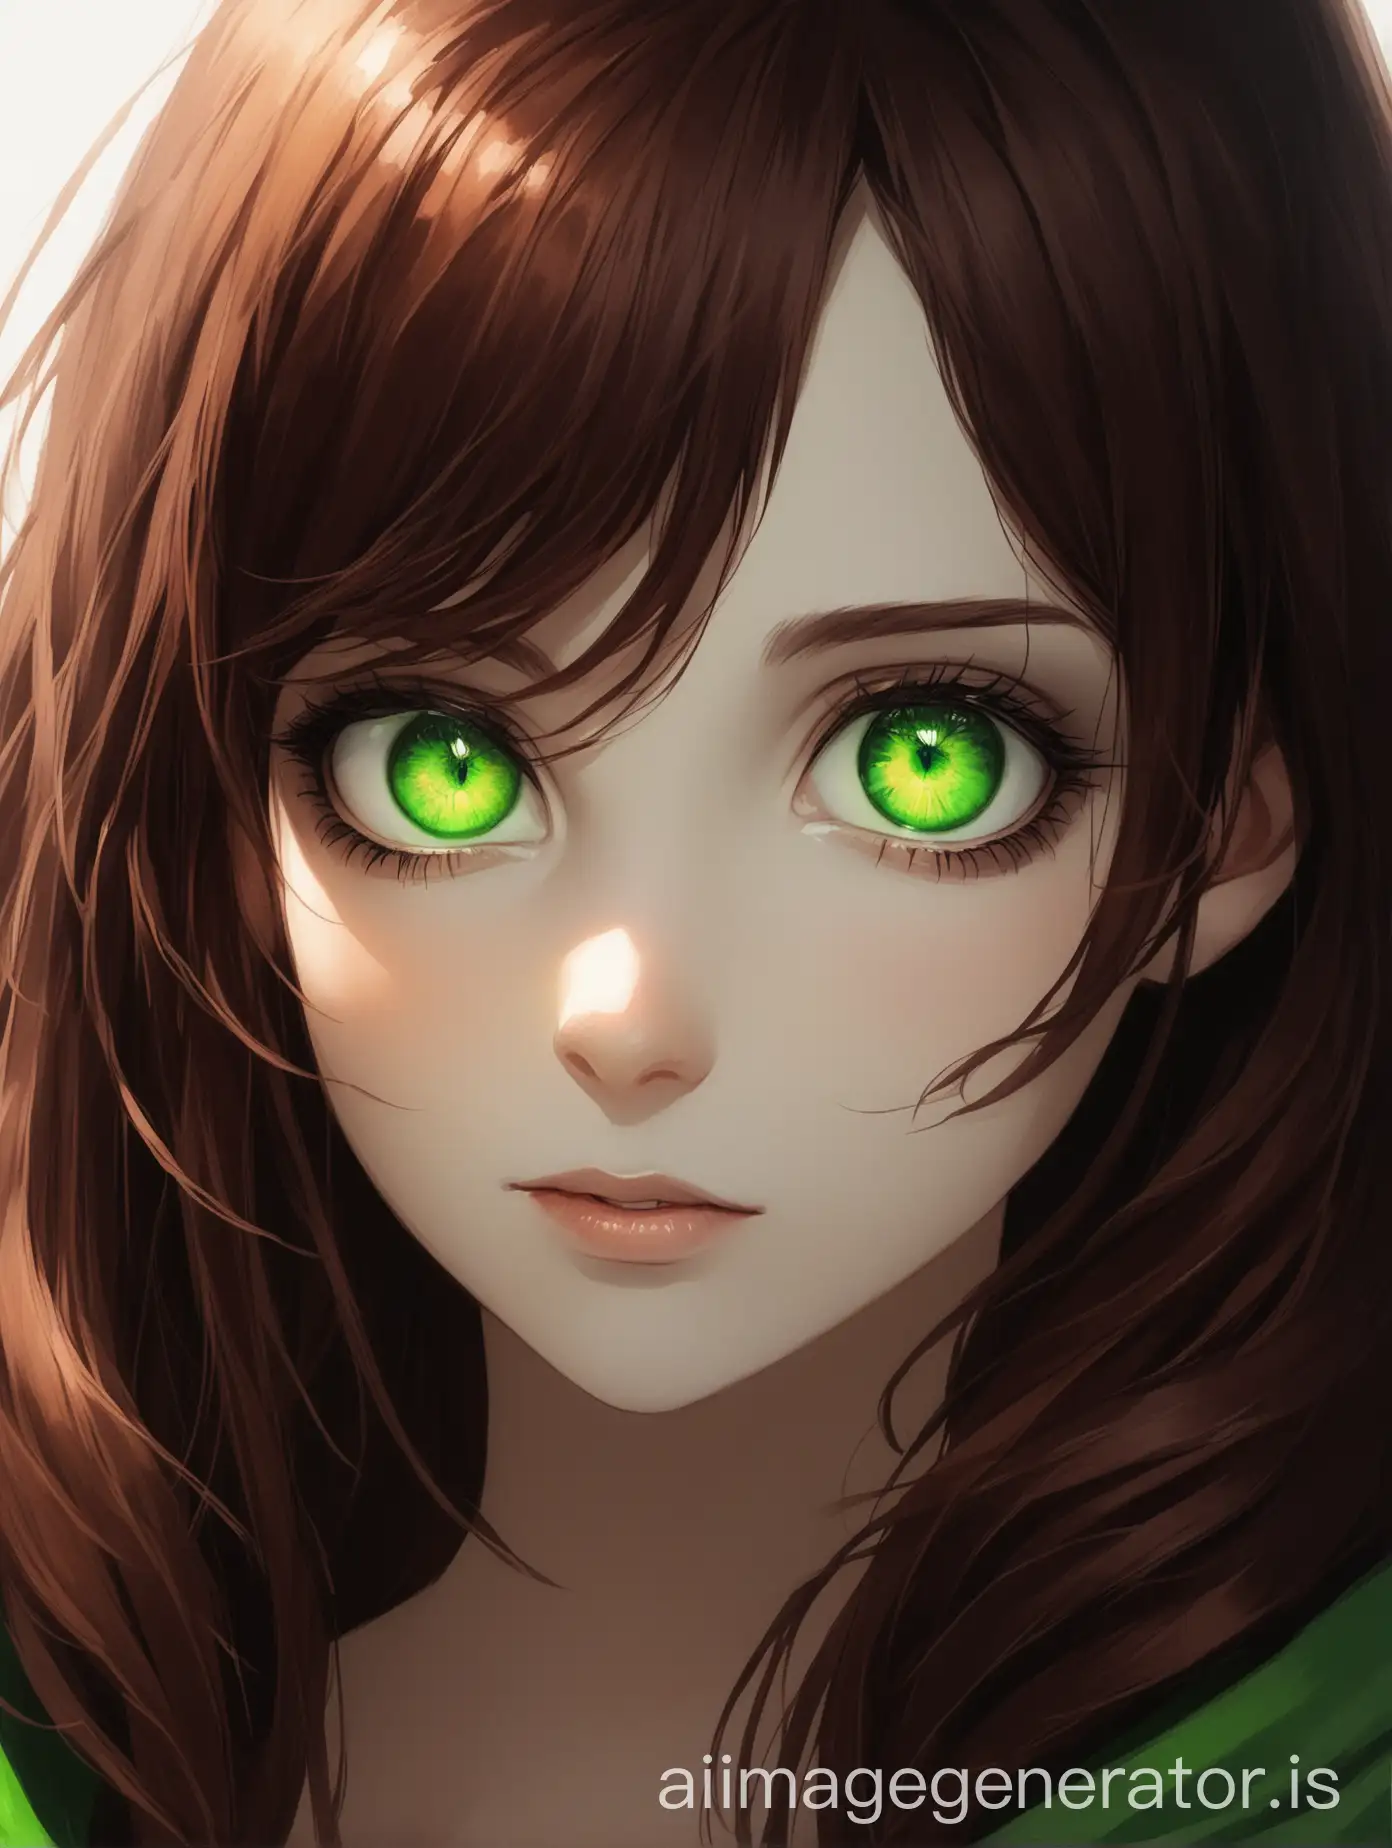 Portrait-of-a-Girl-with-Dark-Auburn-Hair-and-Bright-Green-Eyes